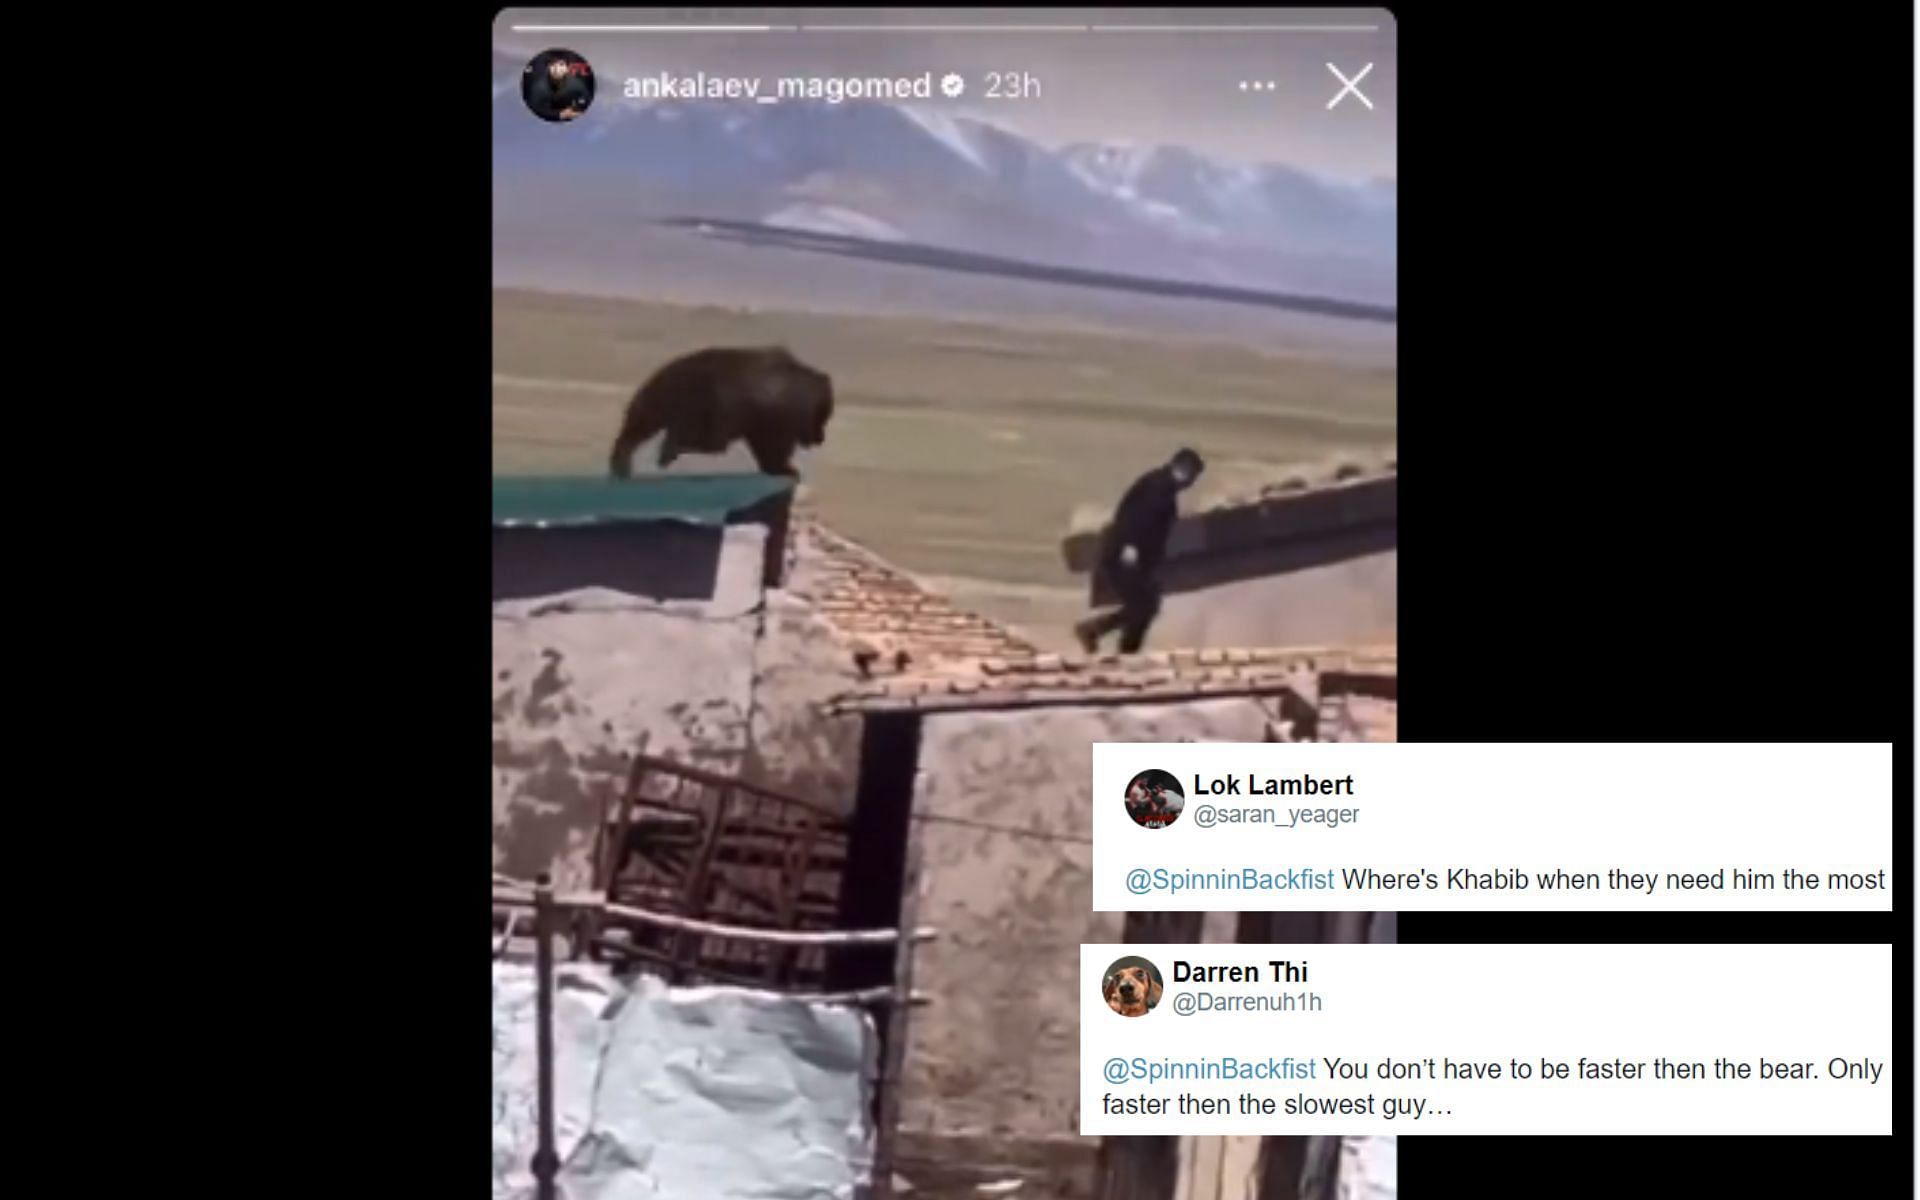 Magomed Ankalaev posts video of bear chasing people in Dagestan [Image courtesy: @SpinninBackfist on Twitter]